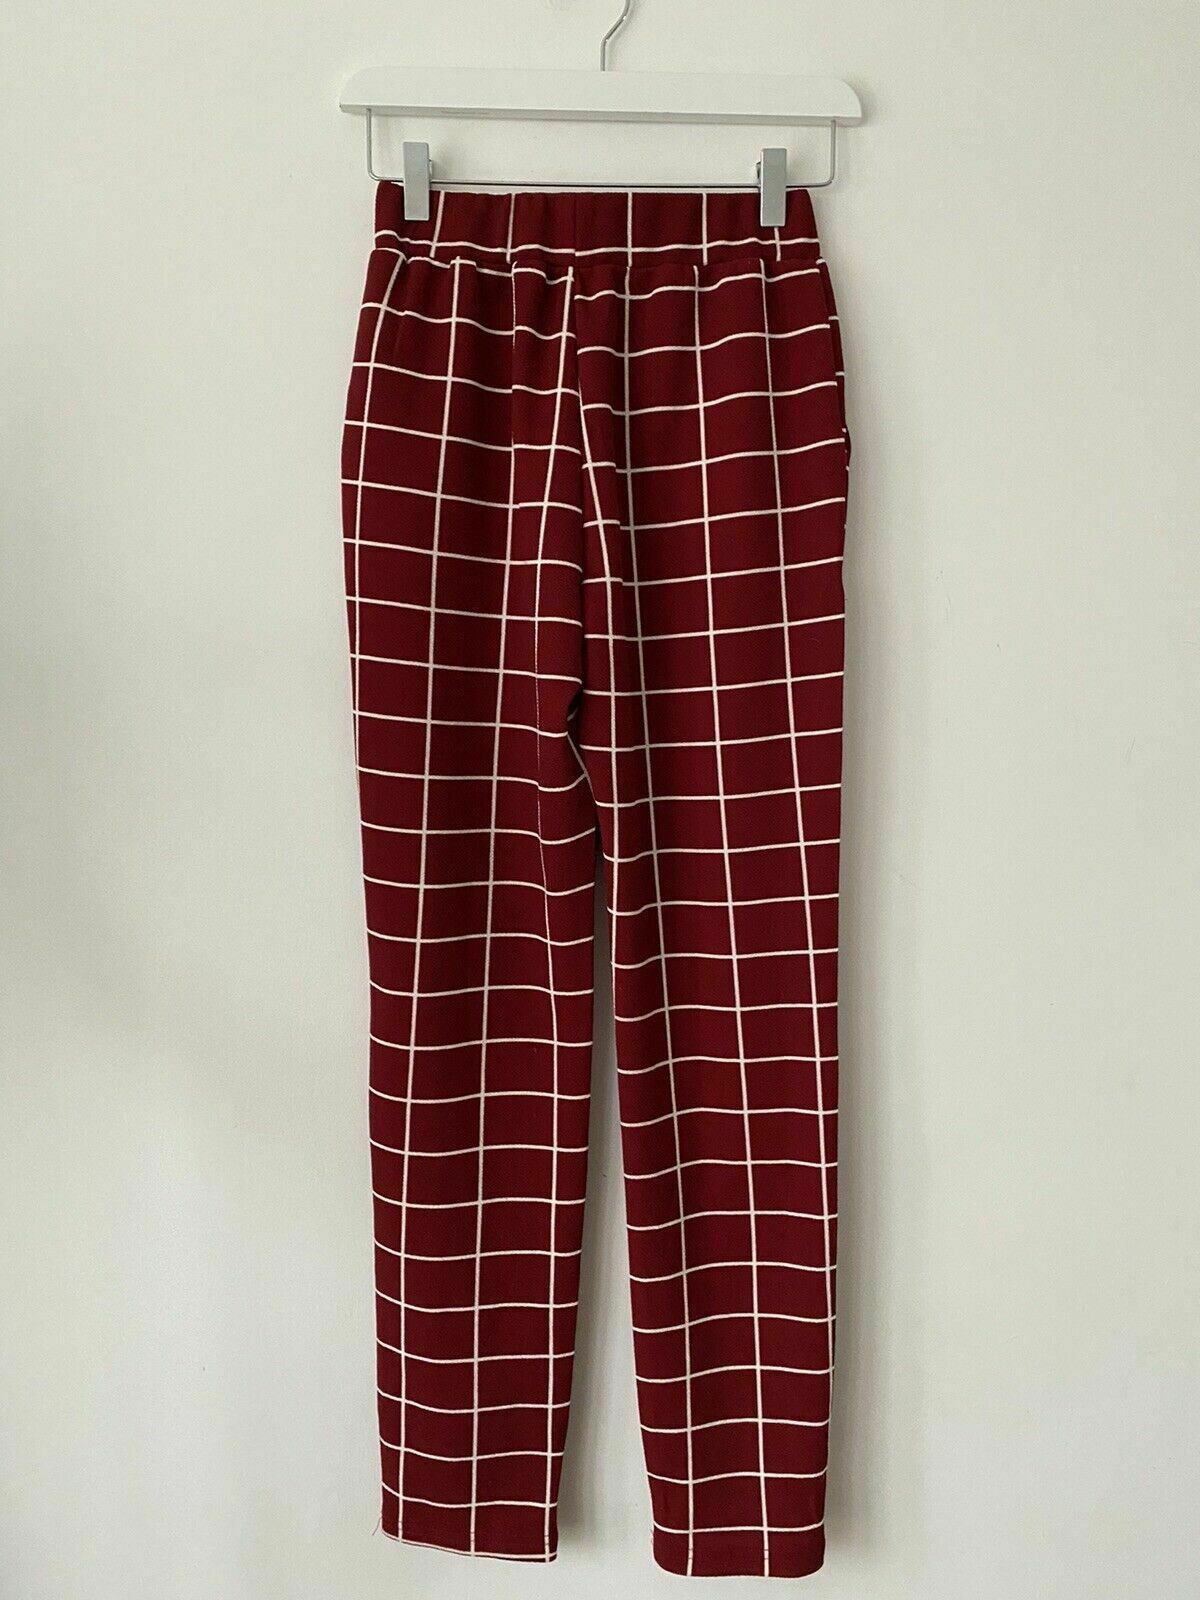 SHEIN Maroon Grid Trousers Size XS 6 - 8 Pockets